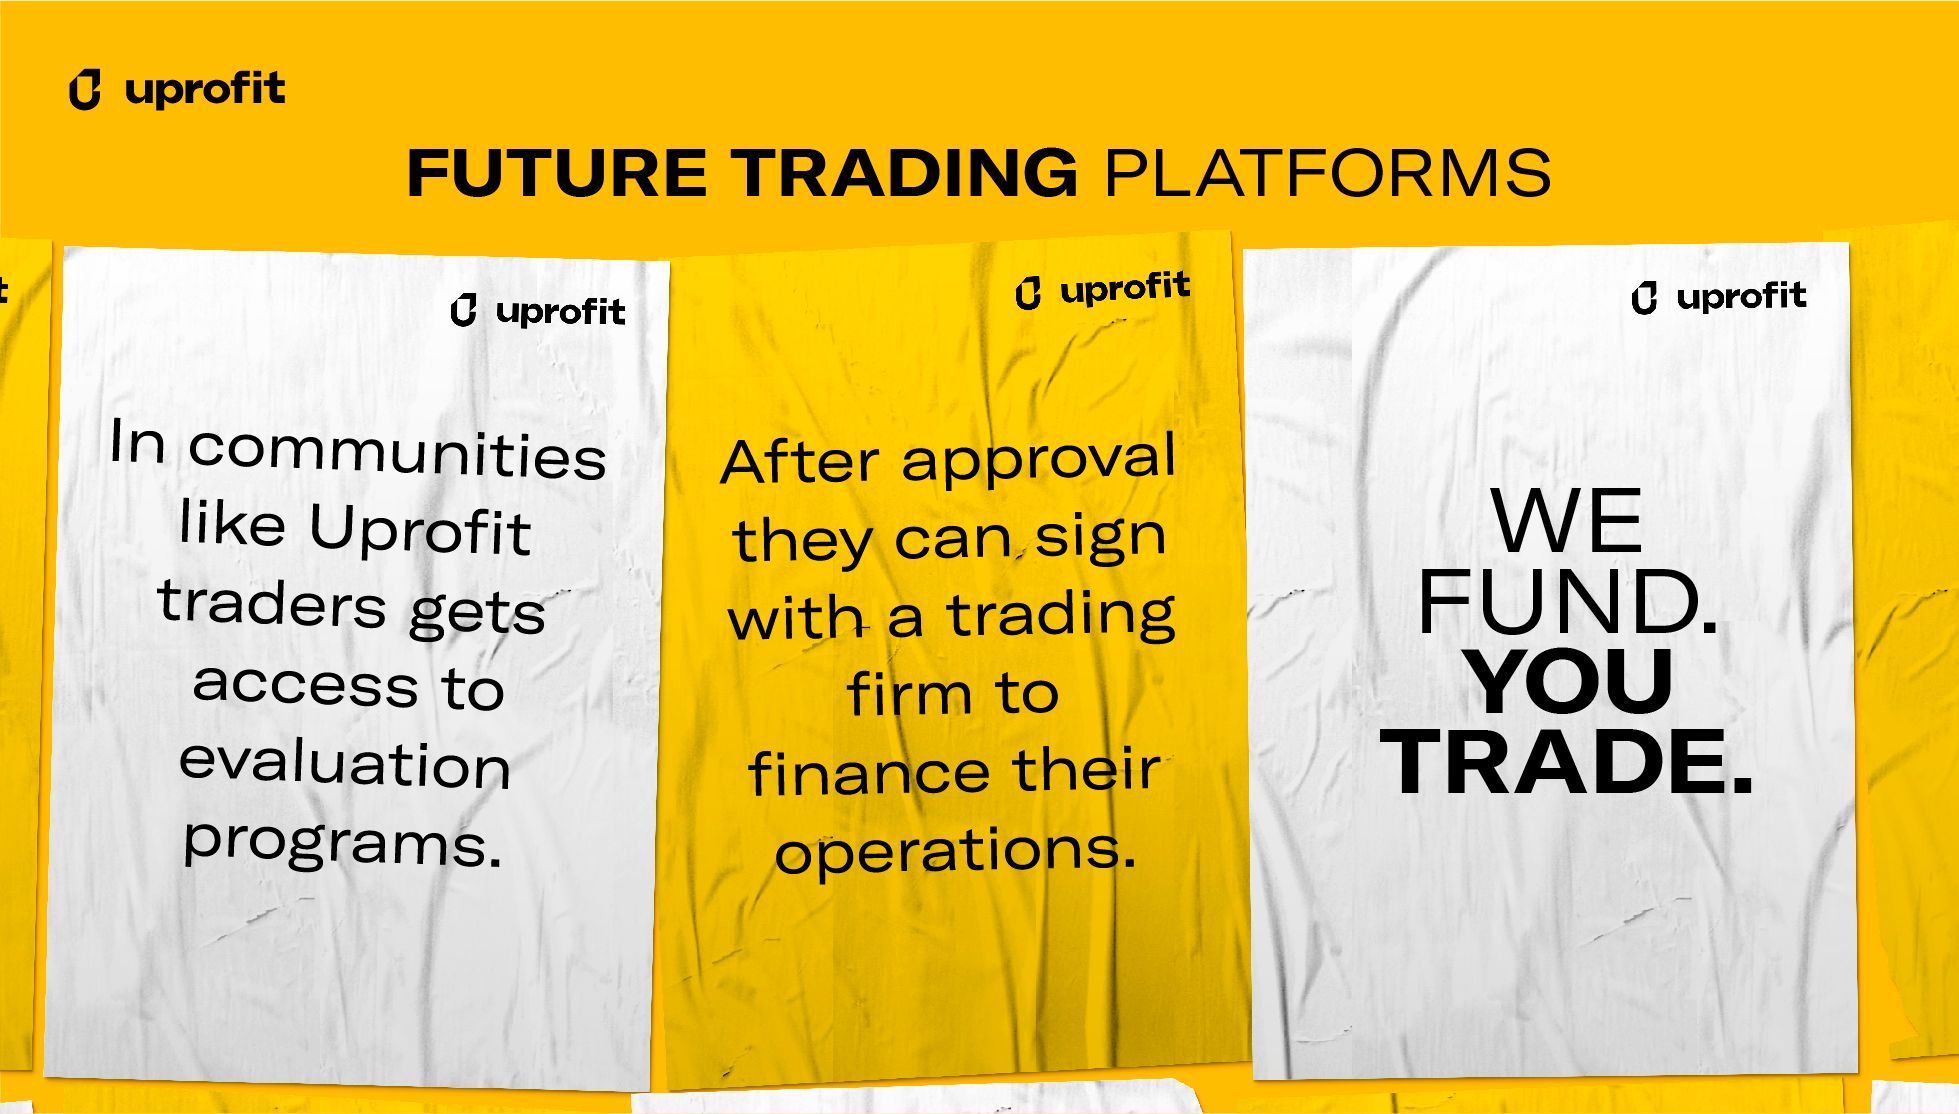 How Does Futures Trading Work